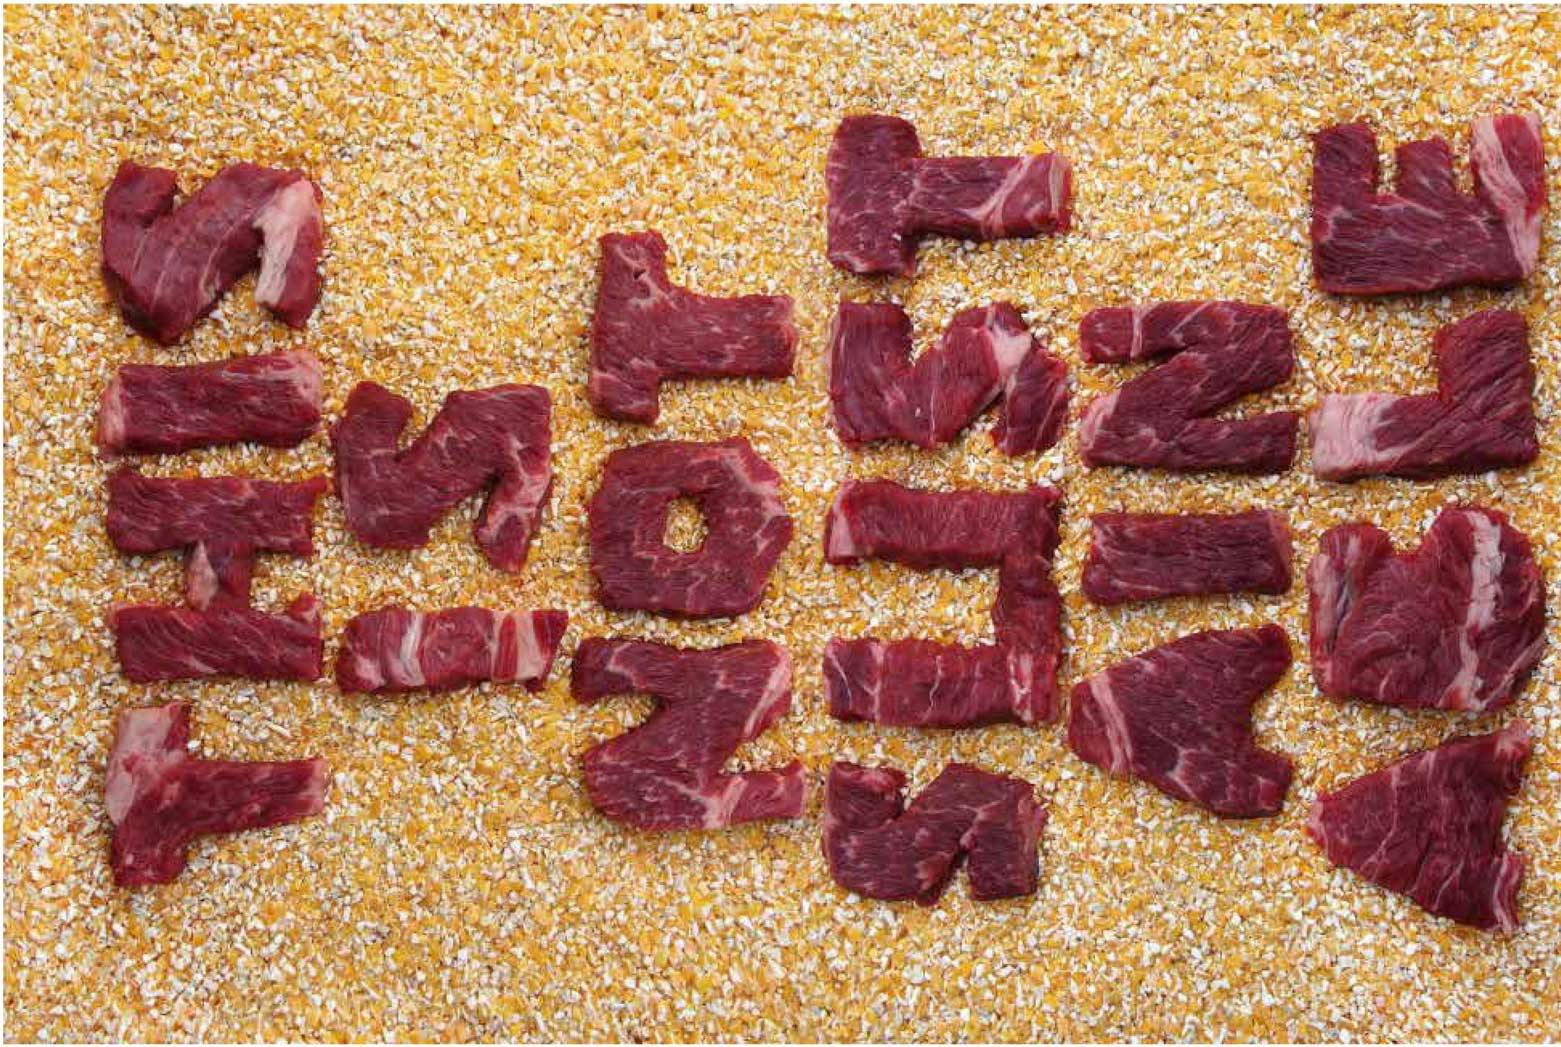 Key text: "This Is Not Sustainable" spelled out in pieces of beef on a background of animal feed.